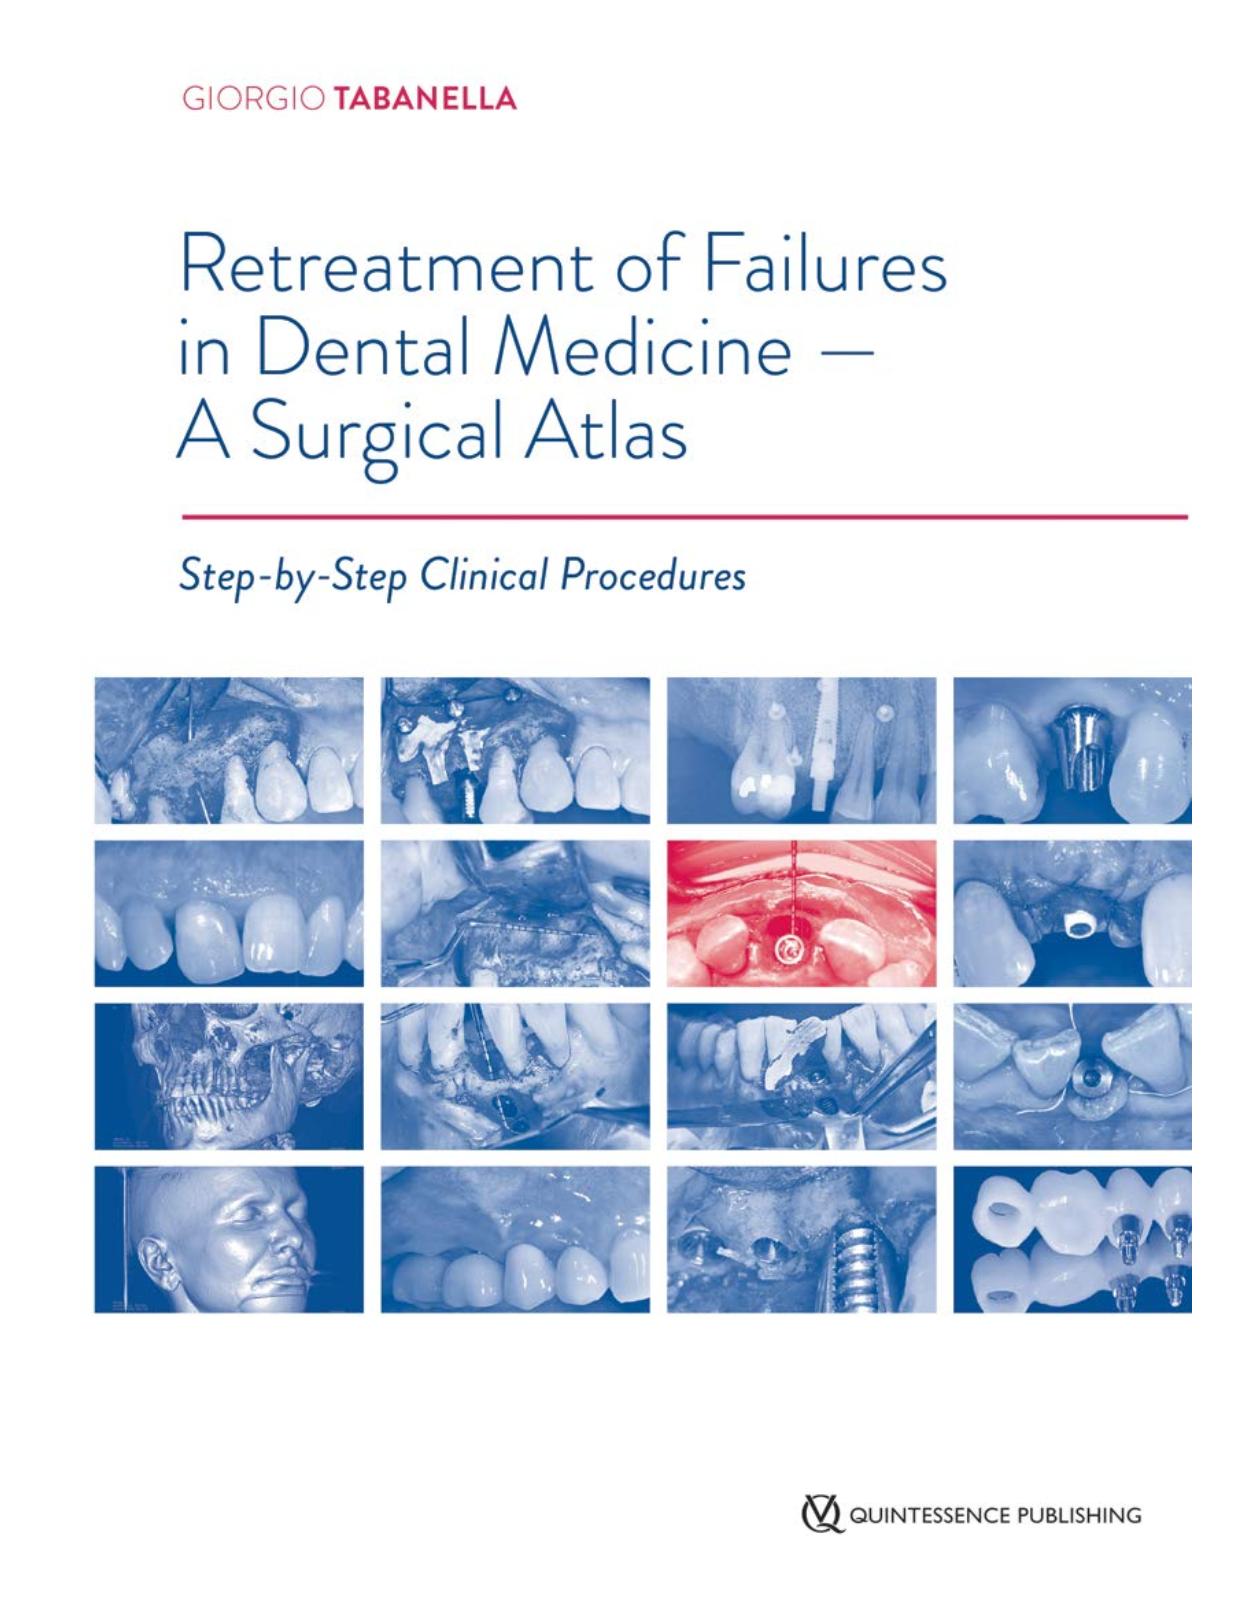 Retreatment of Failures in Dental Medicine - A Surgical Atlas: Step-by-Step Clinical Procedures